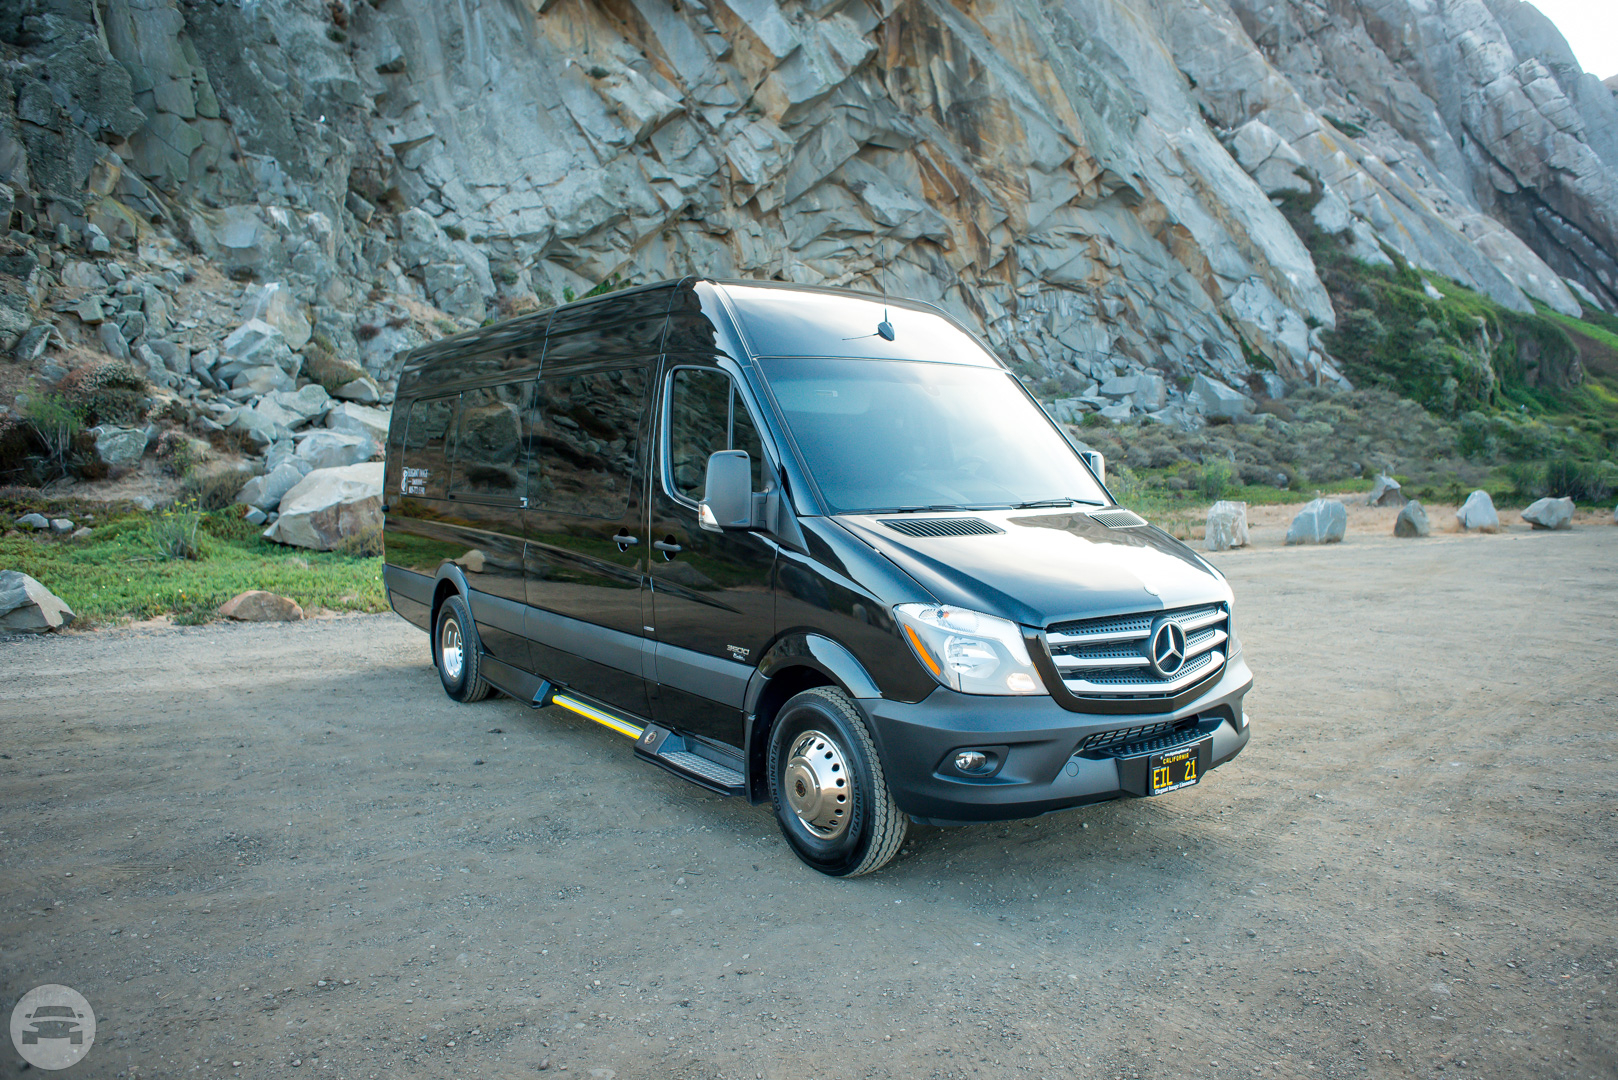 Mercedes Benz Sprinter
Limo /
Buellton, CA 93427

 / Hourly (Other services) $110.00
